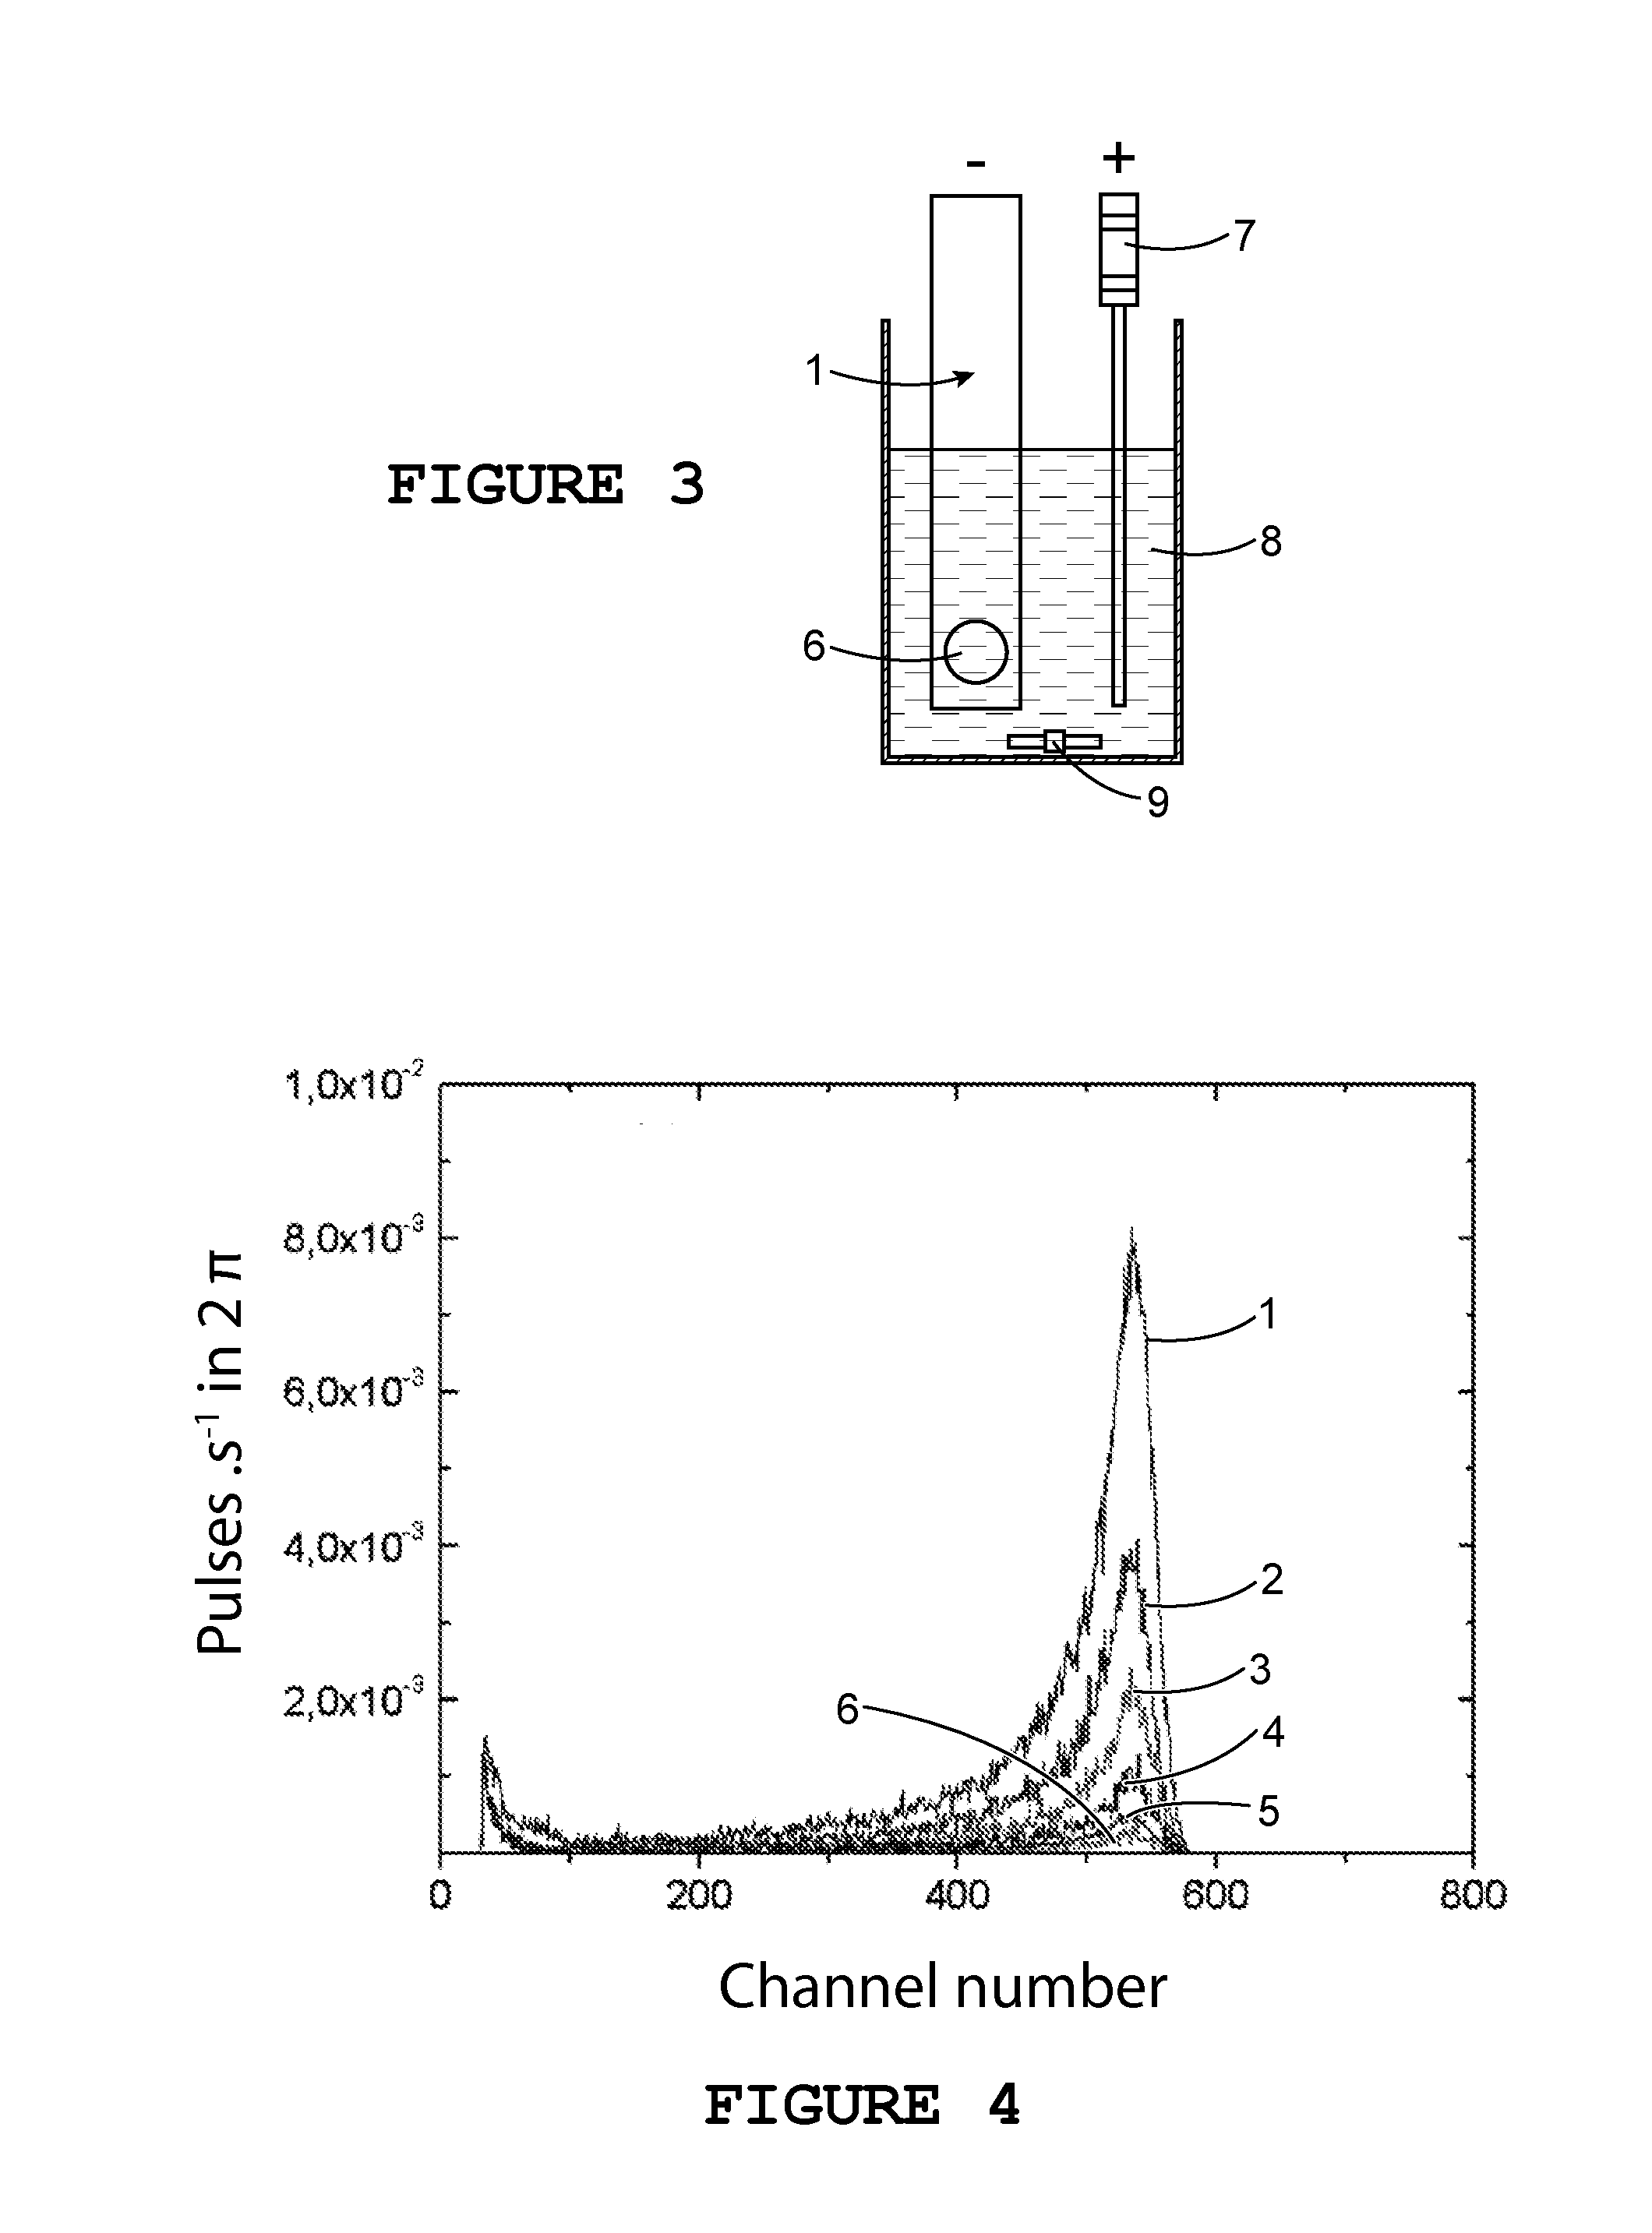 Detection method using an electrochemically-assisted alpha detector for nuclear measurement in a liquid medium